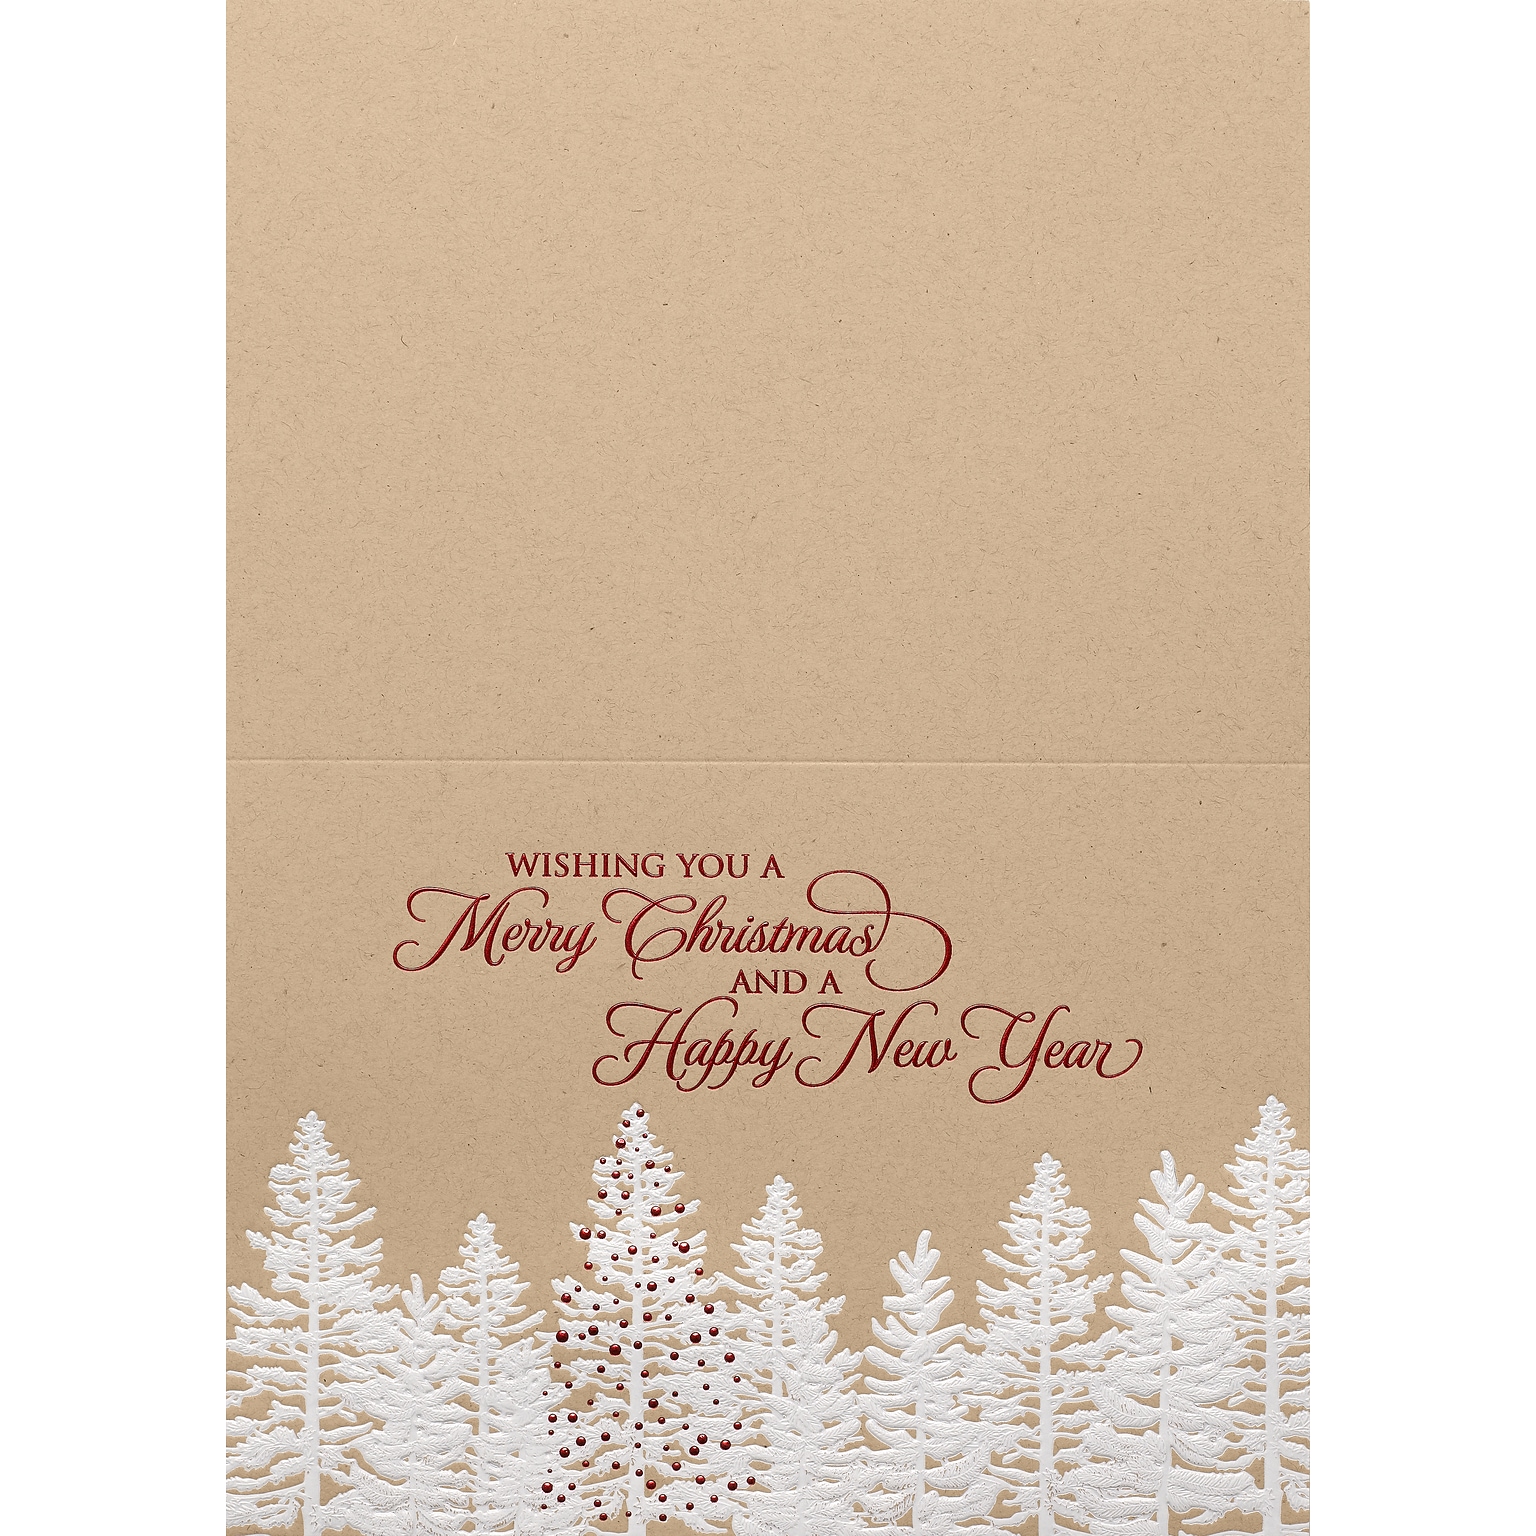 Custom Merry Christmas And Happy New Year Trees Cards, with Envelopes, 7-7/8 x 5-5/8, 25 Cards per Set